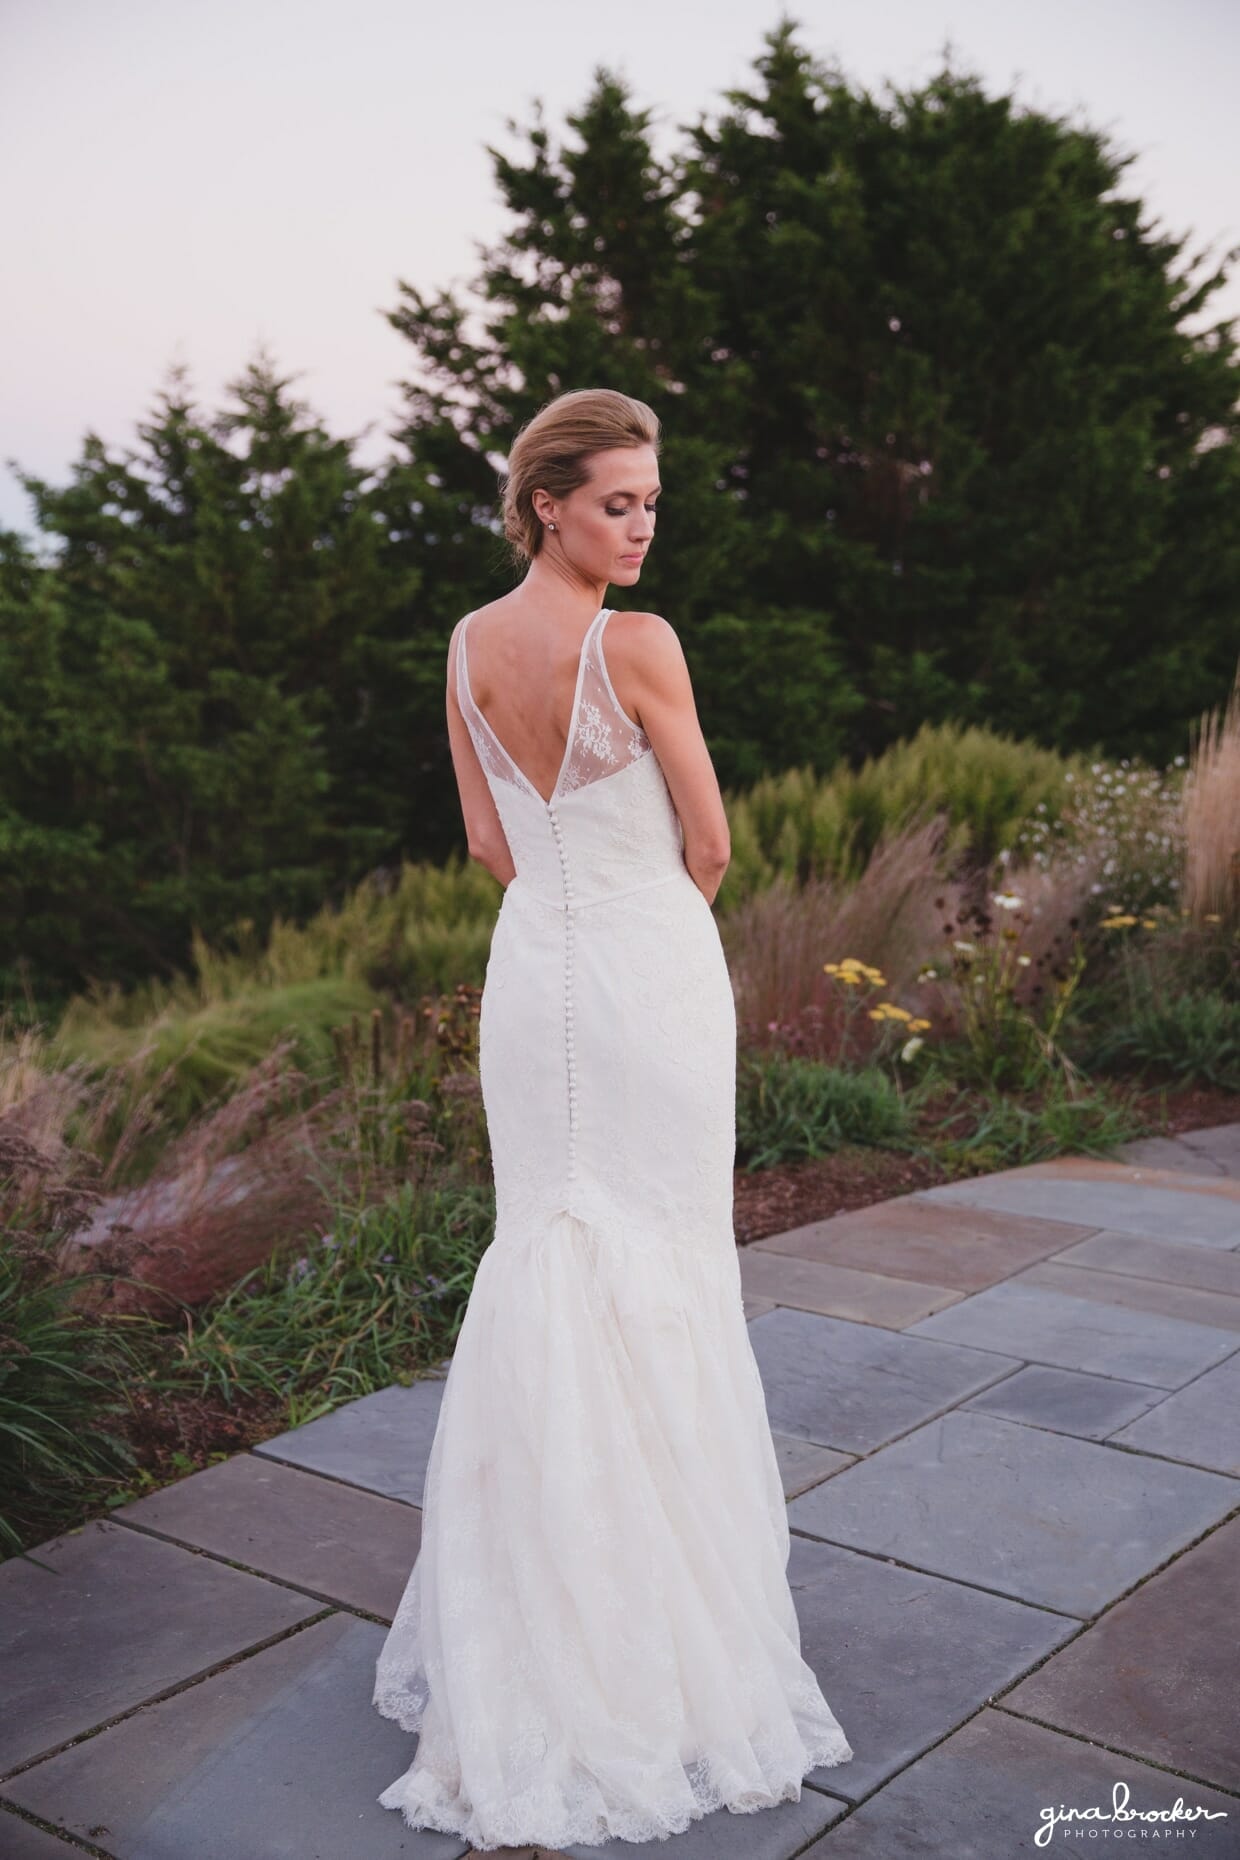 A sunset portrait of a bride featuring the back of her beautiful lace Amy Kuschel wedding dress during her Nantucket Wedding at the Westmoor Club